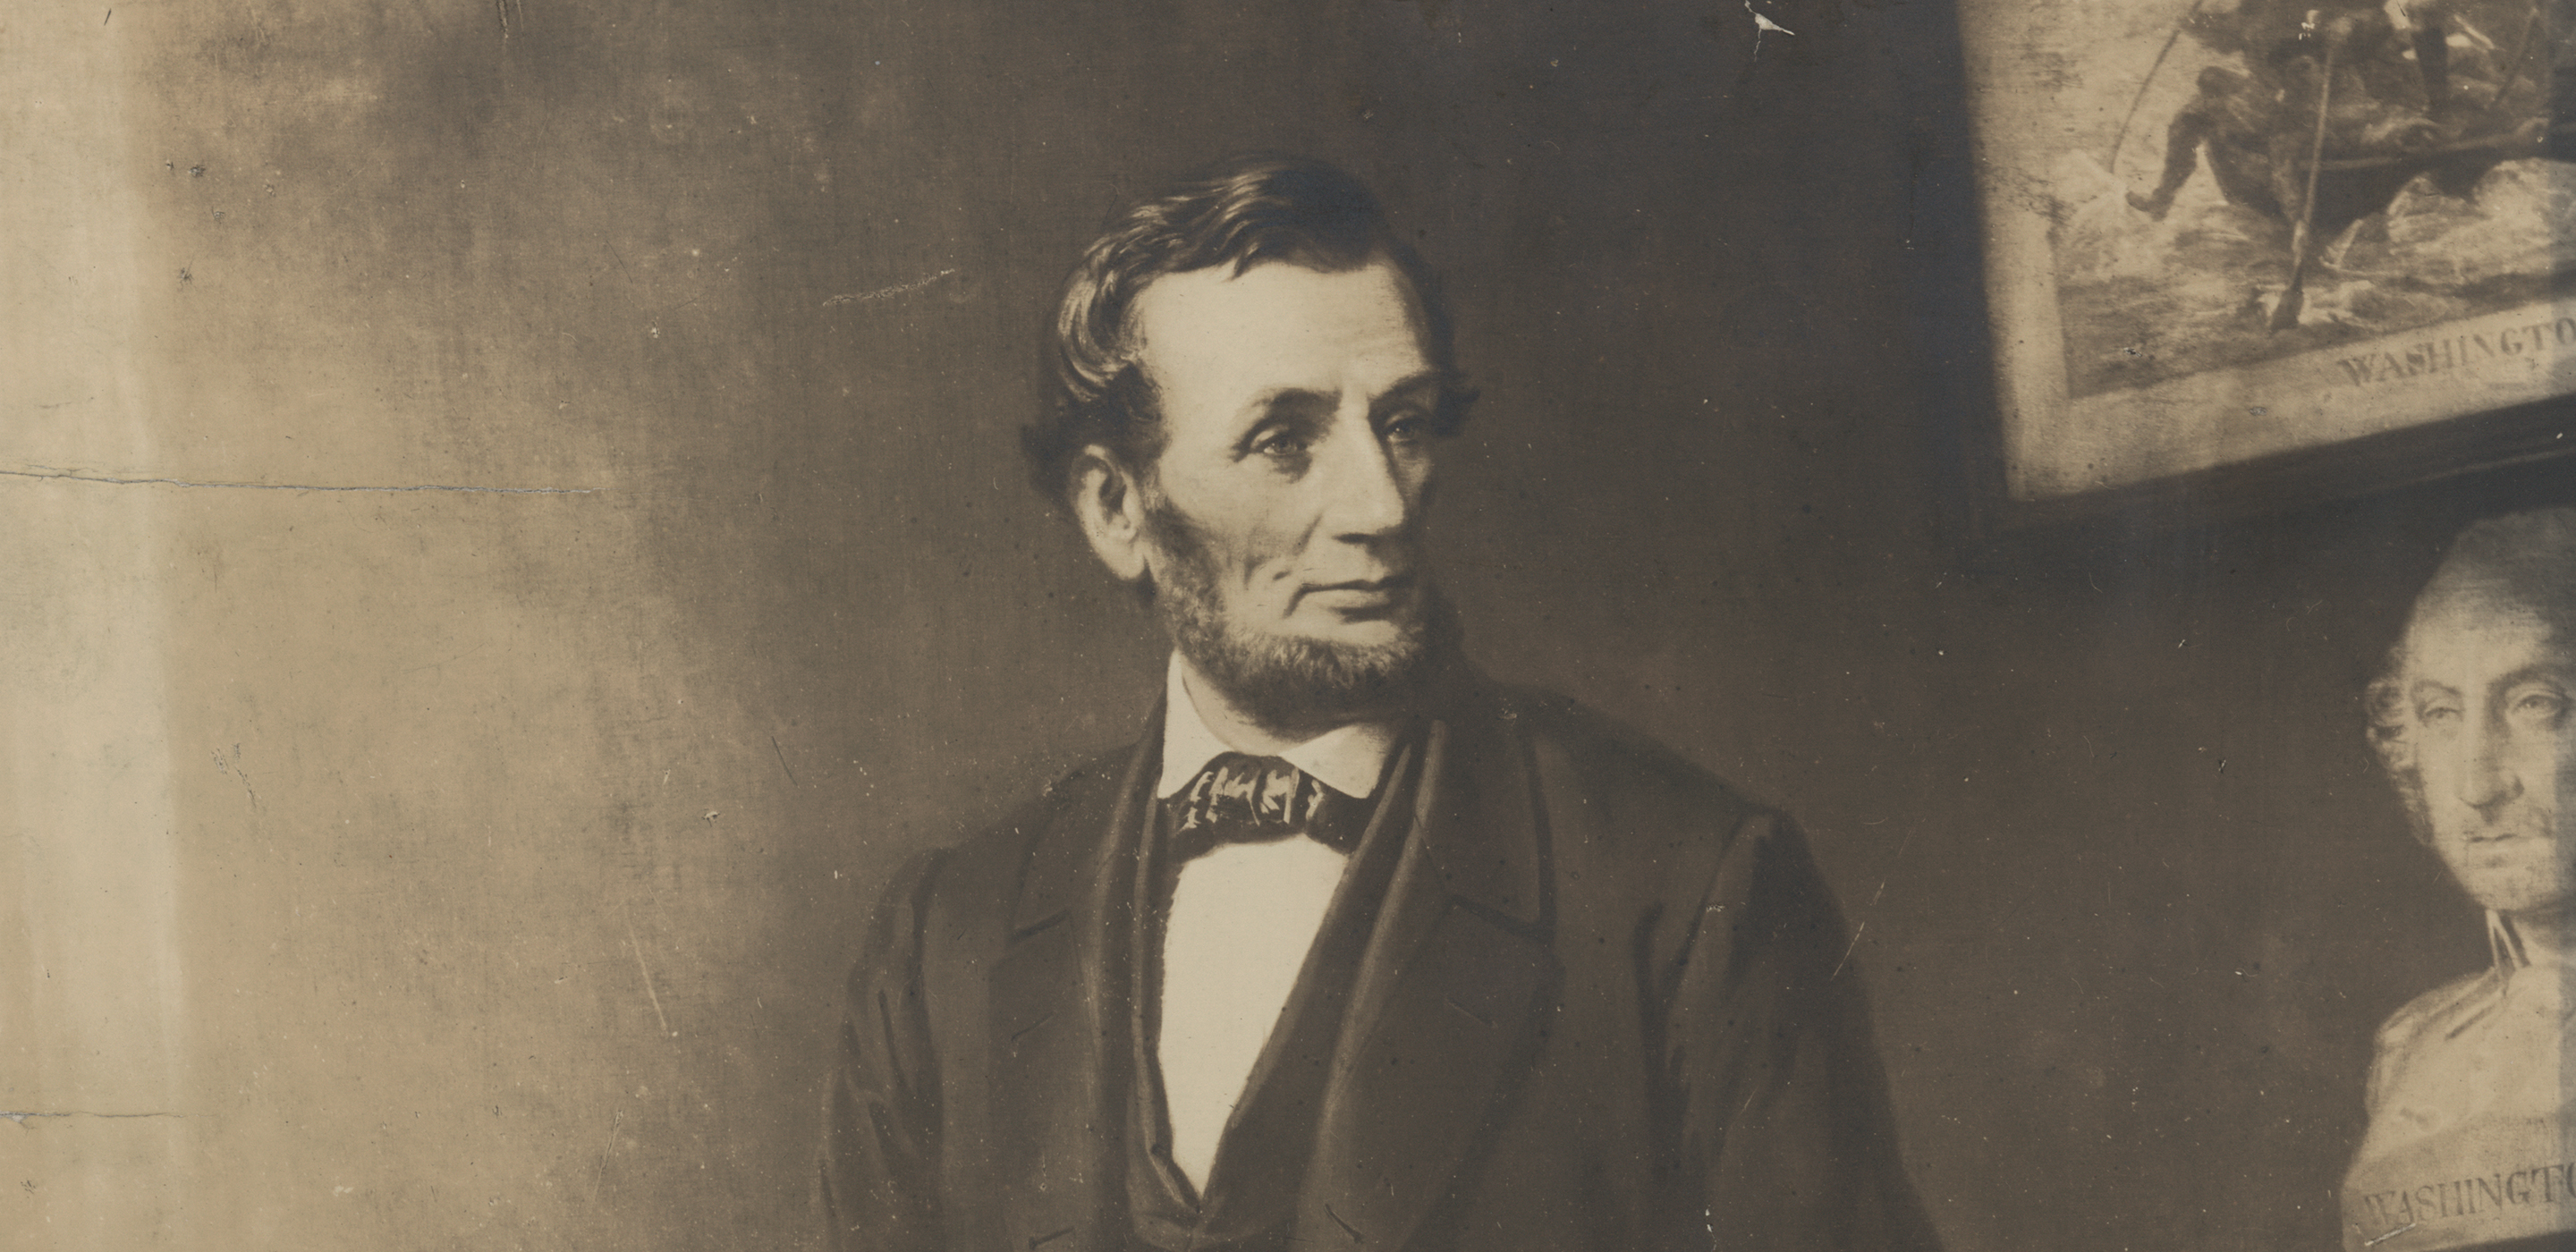 Black and white photograph of an oil painting of Abraham Lincoln standing between a desk and a globe.